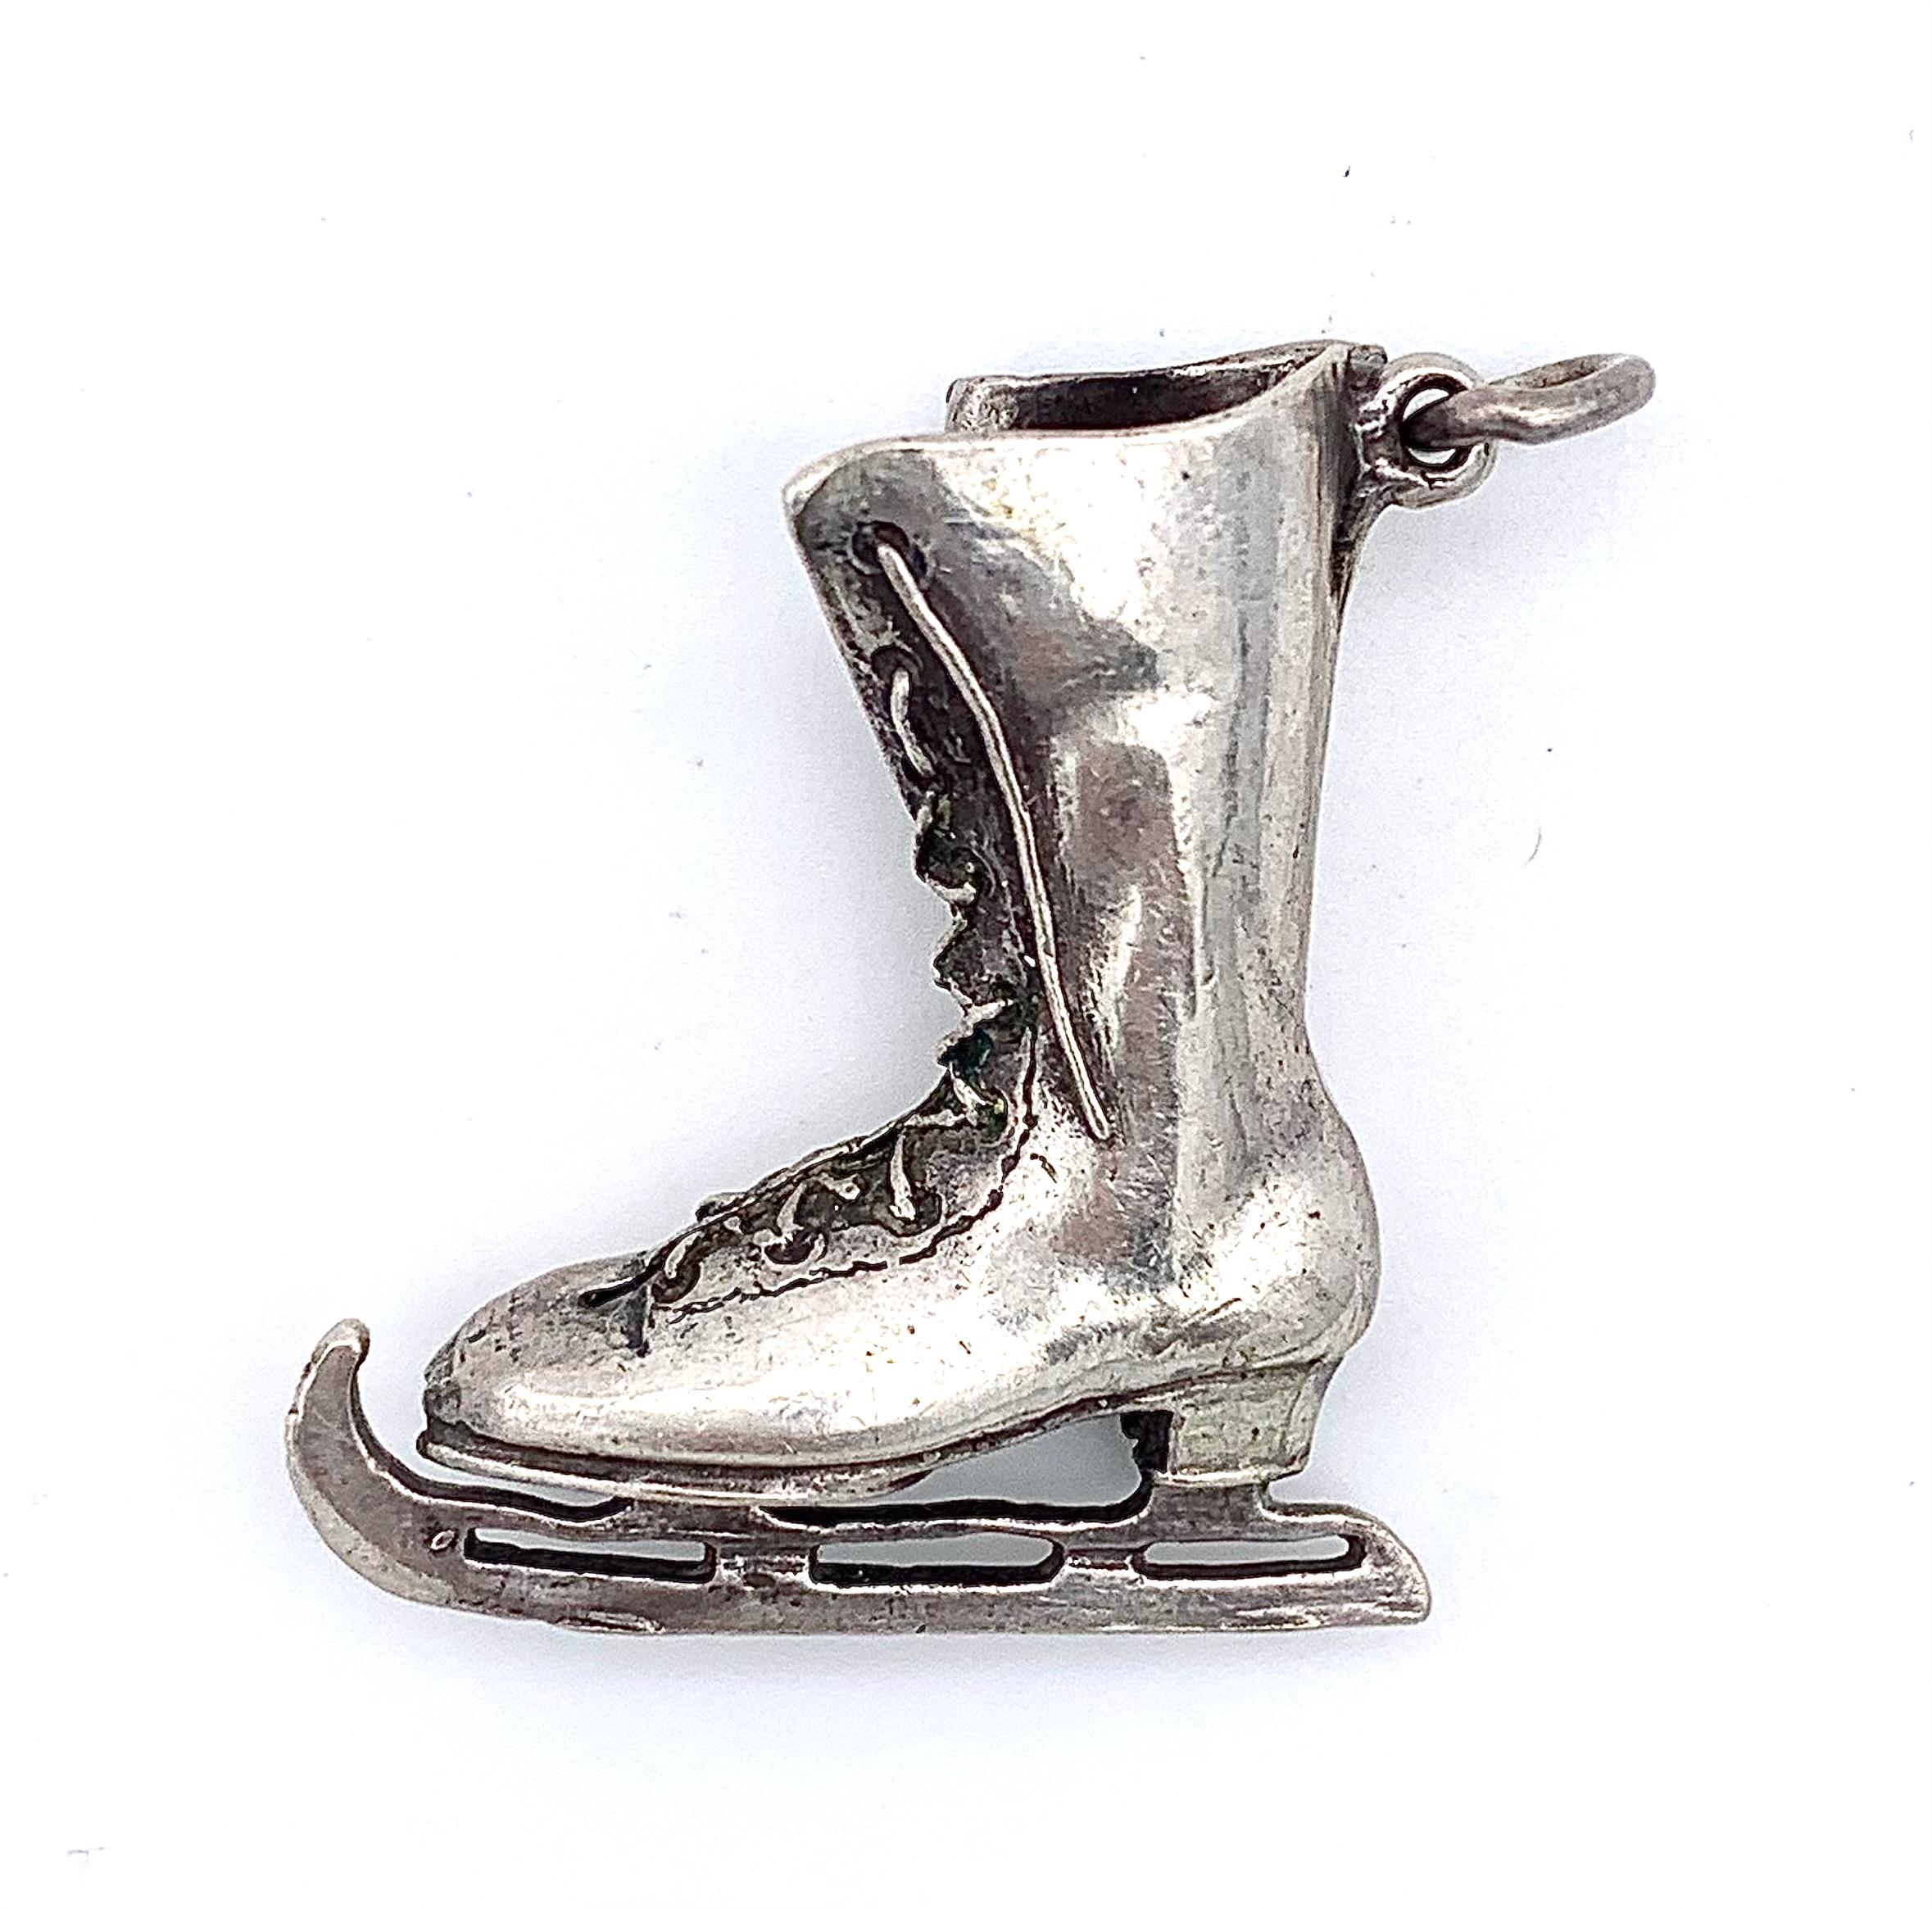 This lovely pendant of an ice skating lace up boot was made
towards the end of the nineteenth century, a period when ice scating was a fashionable leisure activity. The beautifully modelled boot has been cast out of silver and finished by hand. just